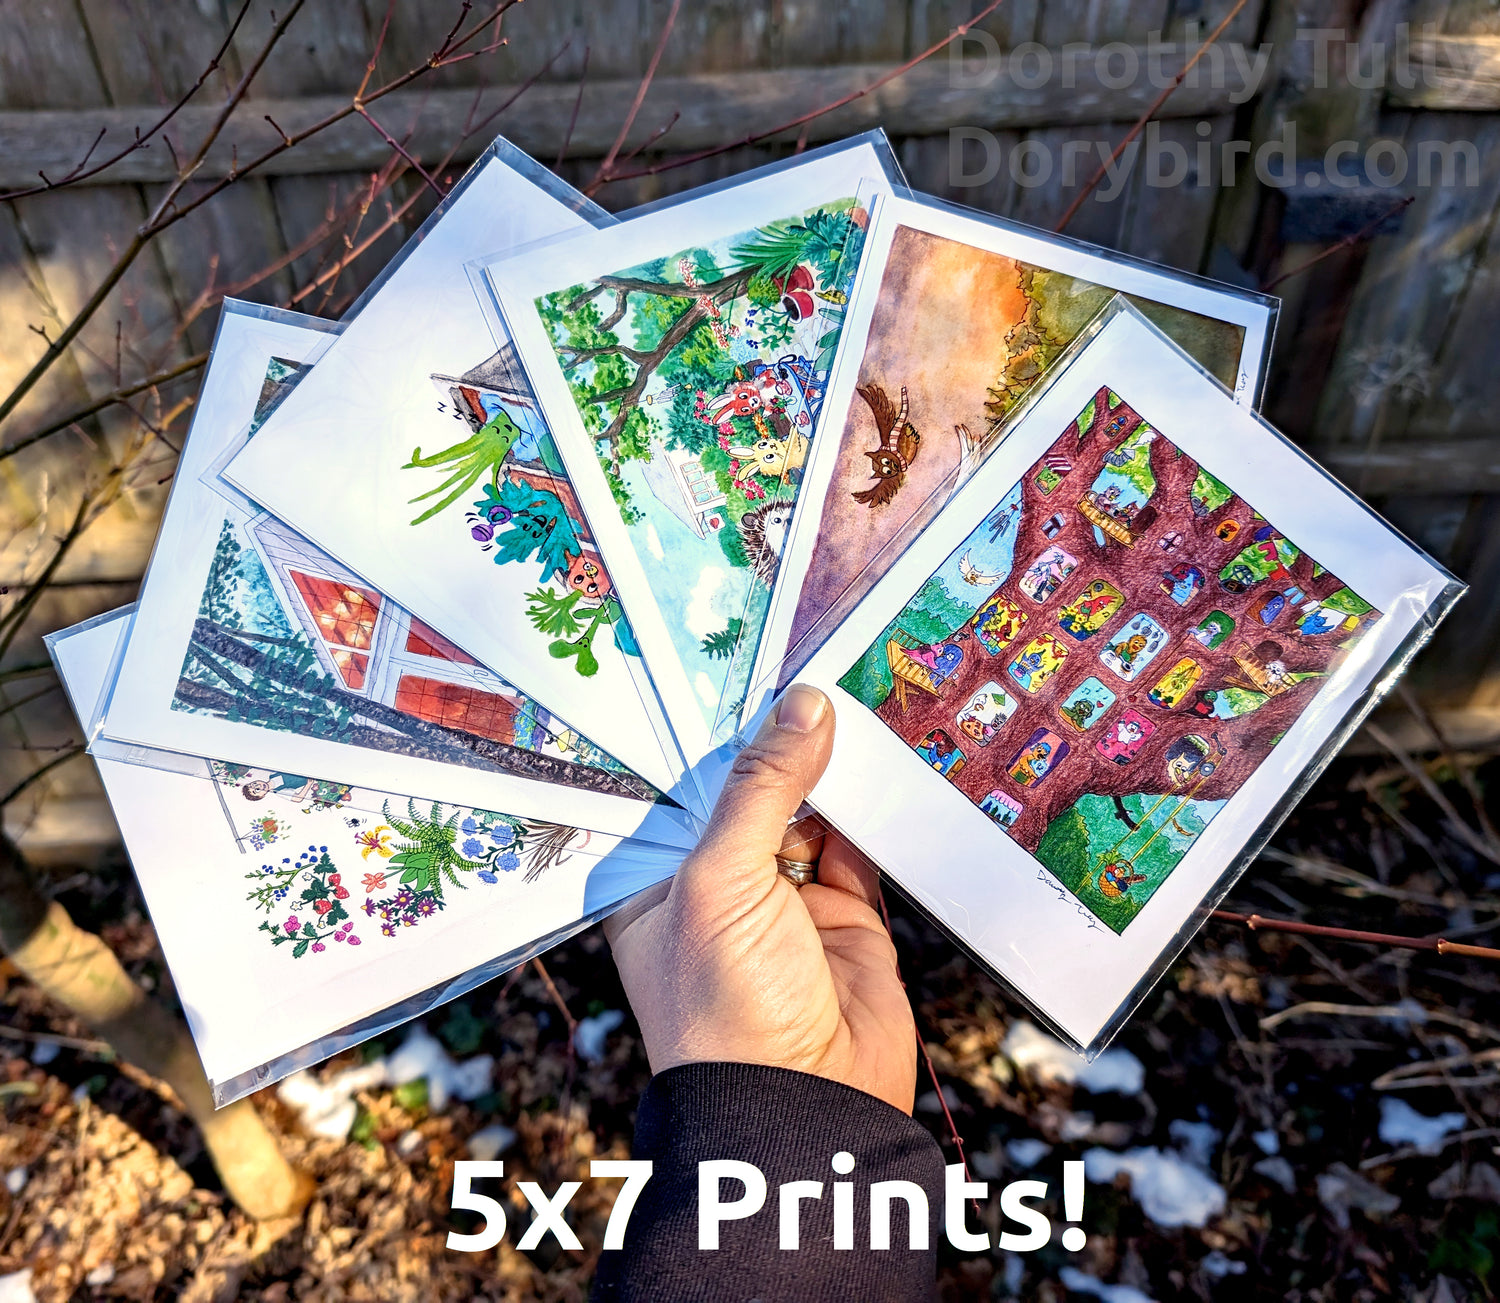 a hand holding 6 of artist Dorothy Tully's 5x7 small art prints of animals, plants, childrens illustrations